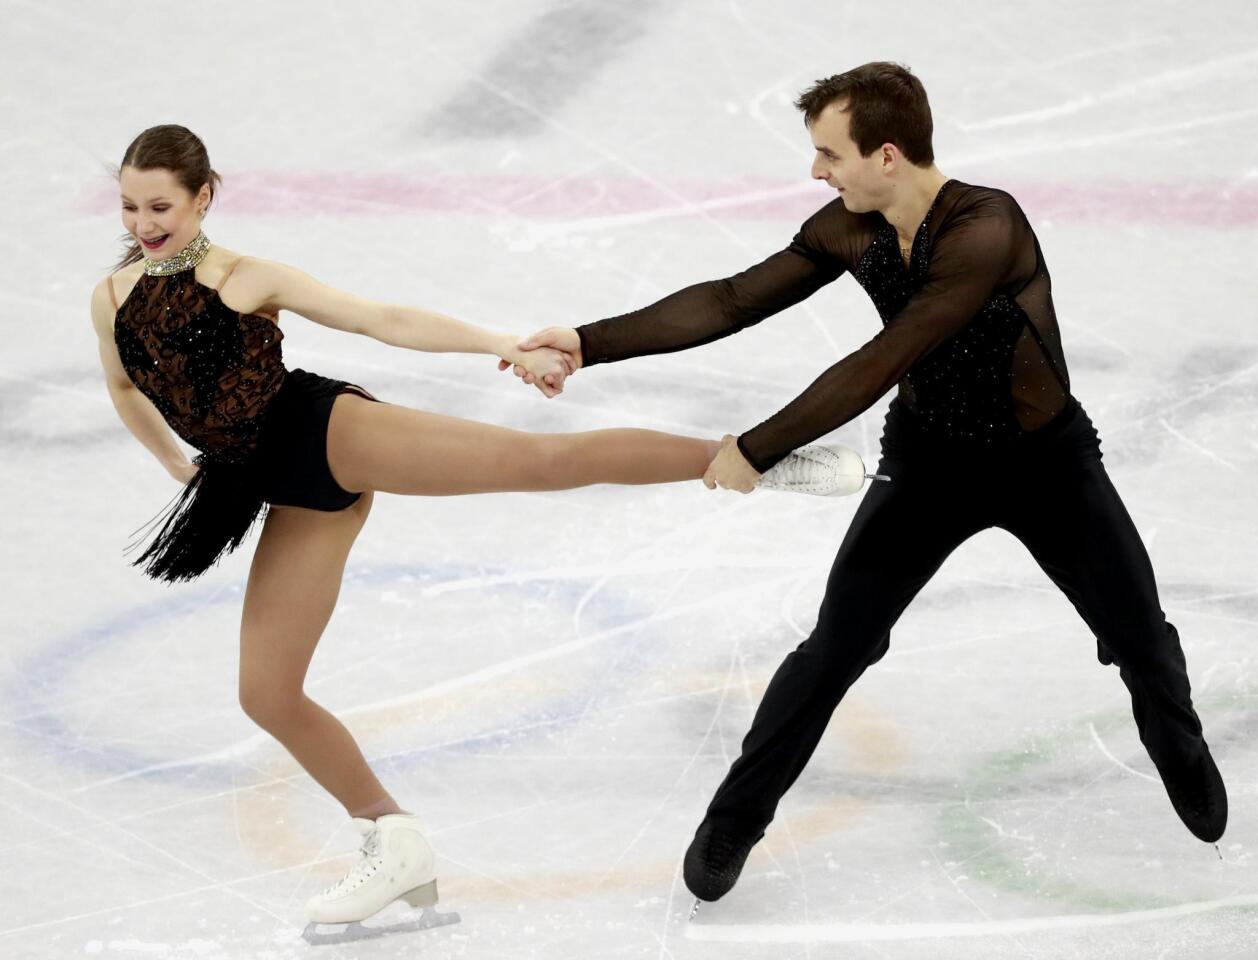 Gangneung (Korea, Republic Of), 14/02/2018.- Annika Hocke and Ruben Blommaert of Germany perform during the Pair Short Program of the Figure Skating competition at the Gangneung Ice Arena during the PyeongChang 2018 Olympic Games, South Korea, 14 February 2018. (Corea del Sur, Alemania) EFE/EPA/HOW HWEE YOUNG ** Usable by HOY and SD Only **